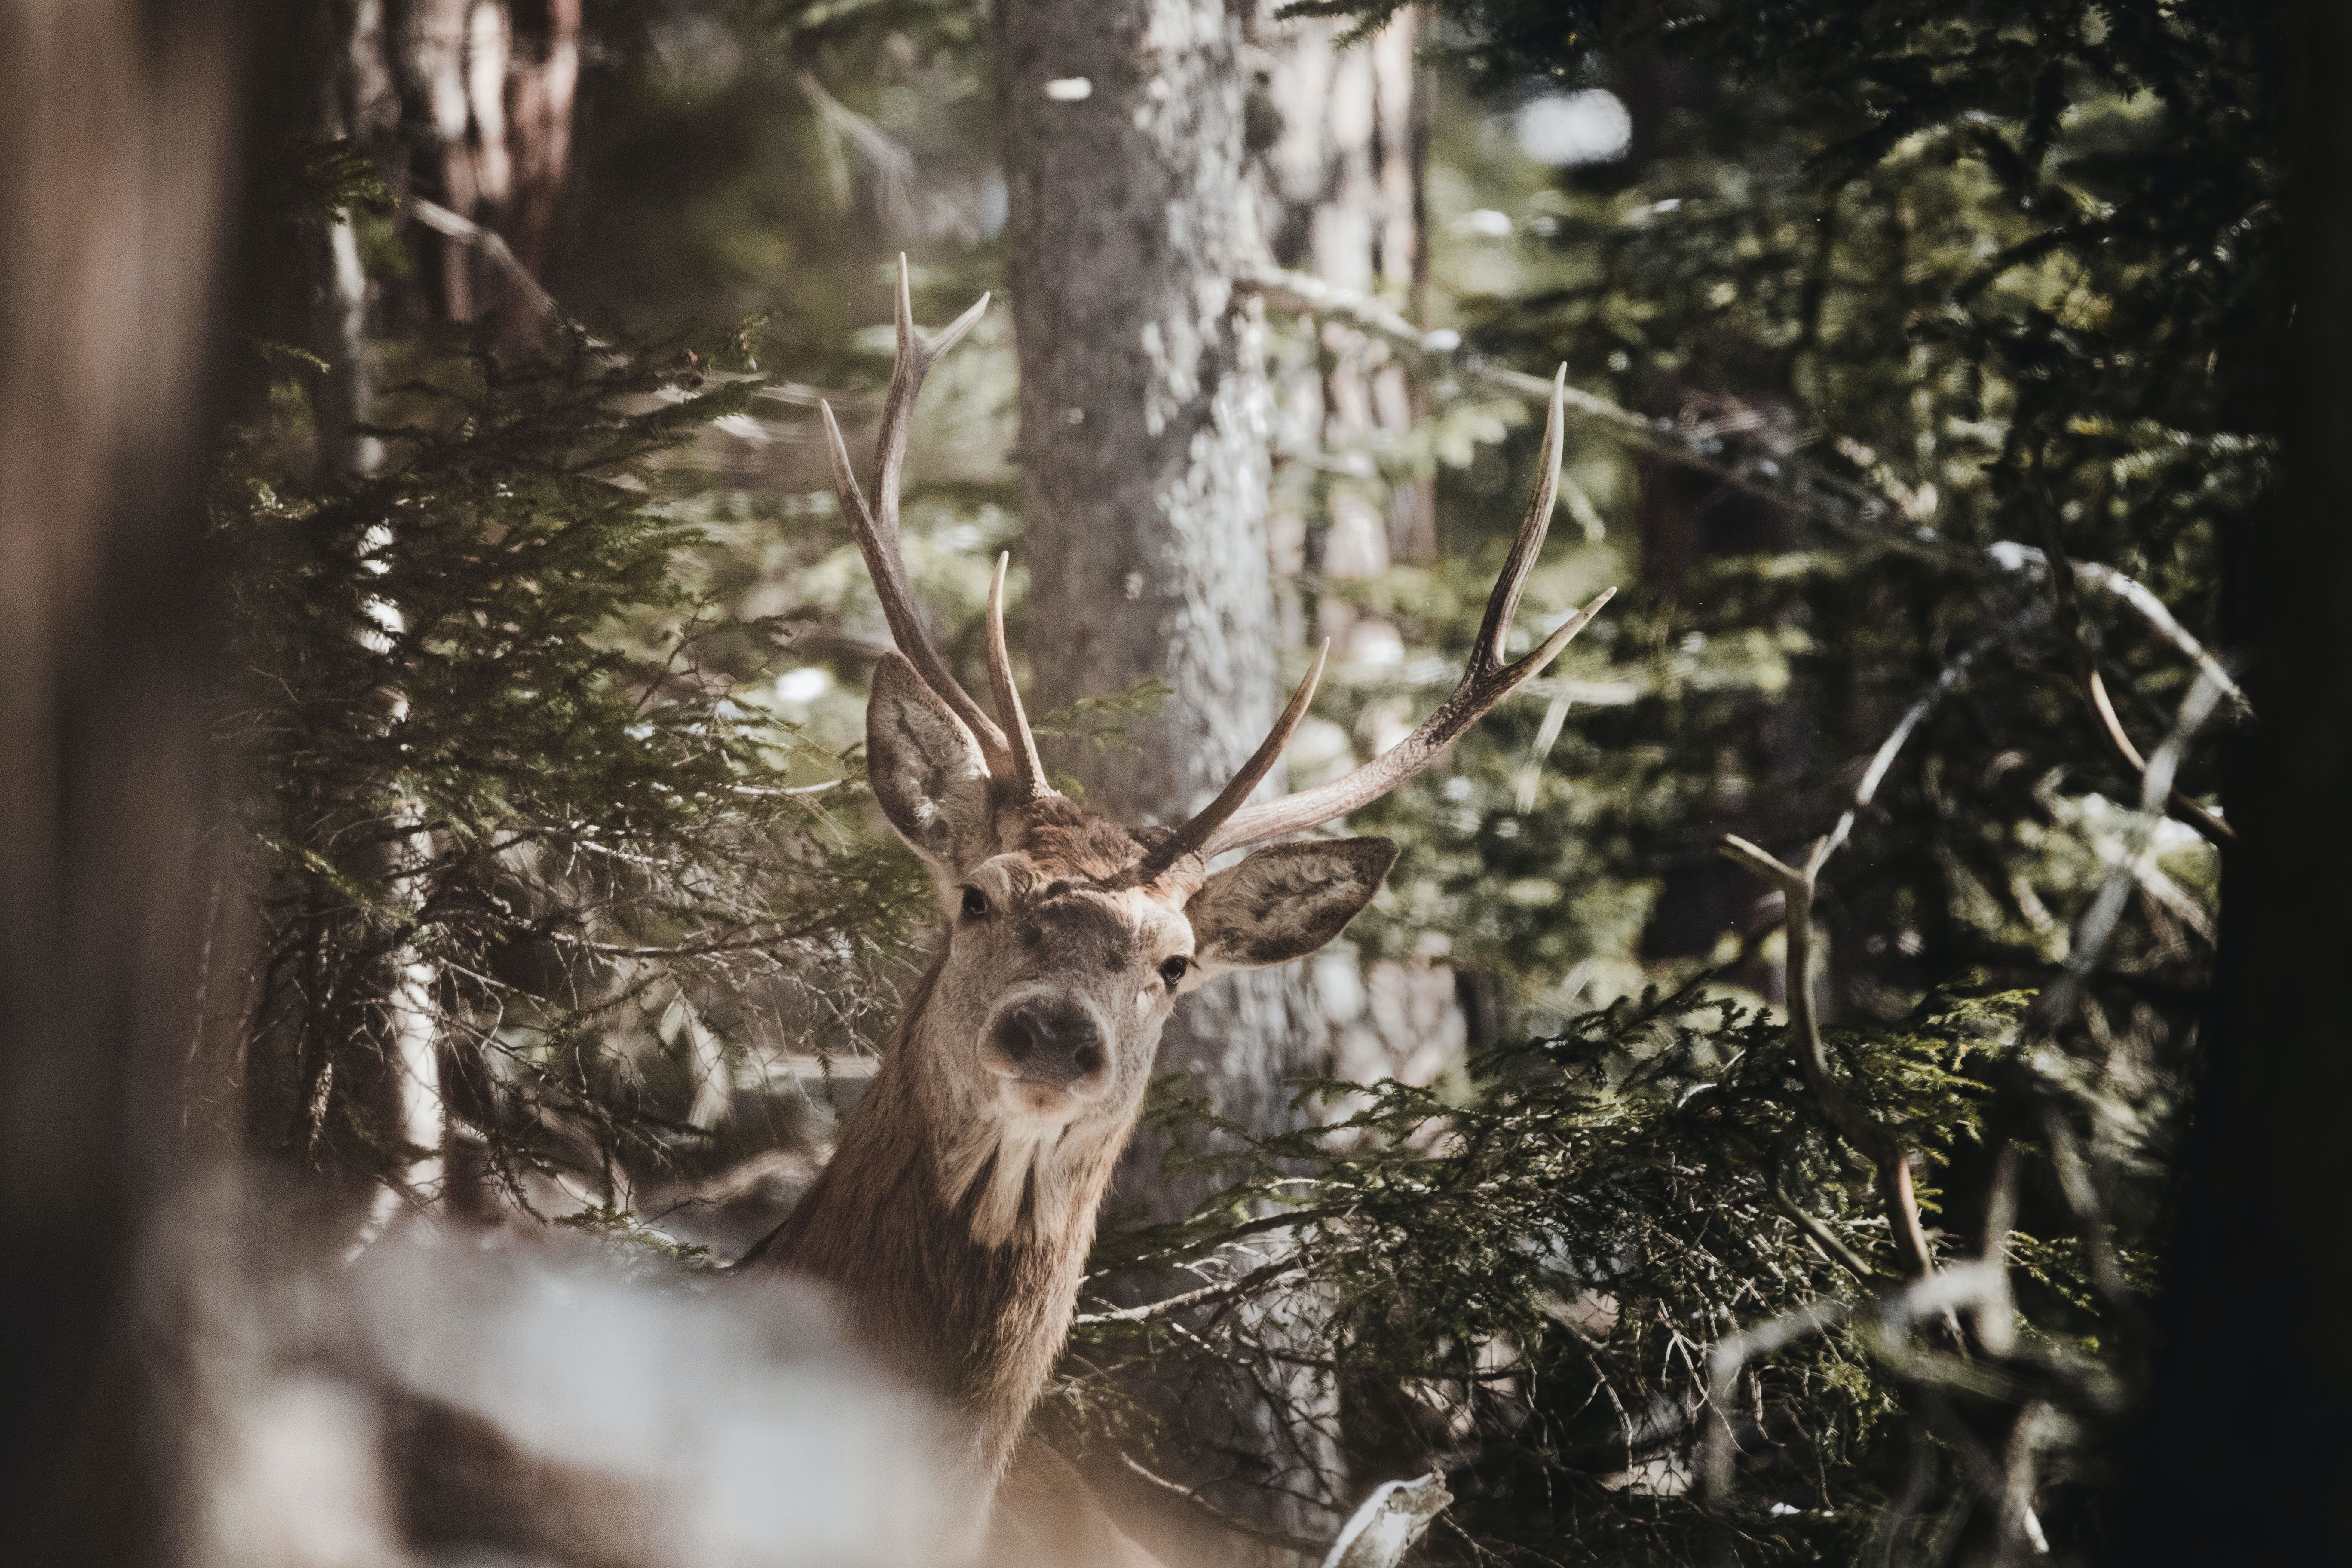 A deer with large antlers looks out from the forest. - Deer